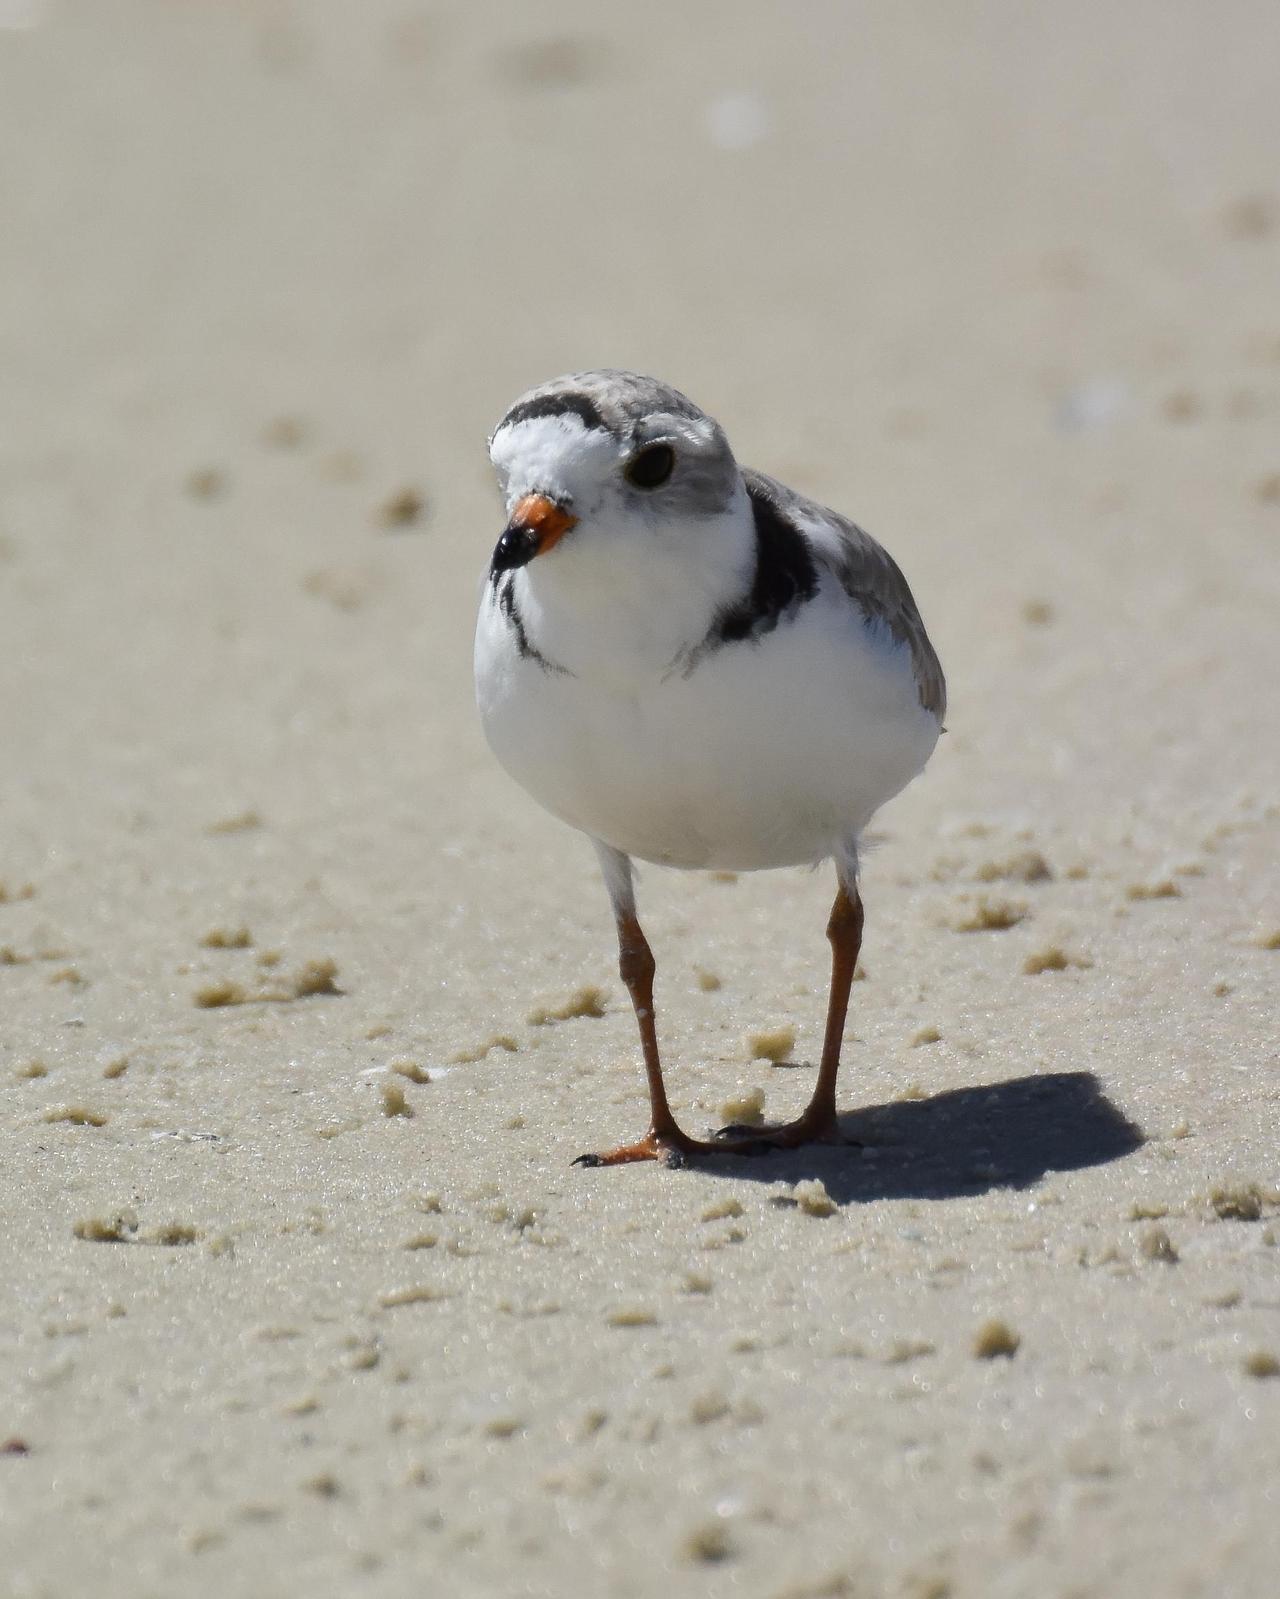 Piping Plover Photo by Steve Percival